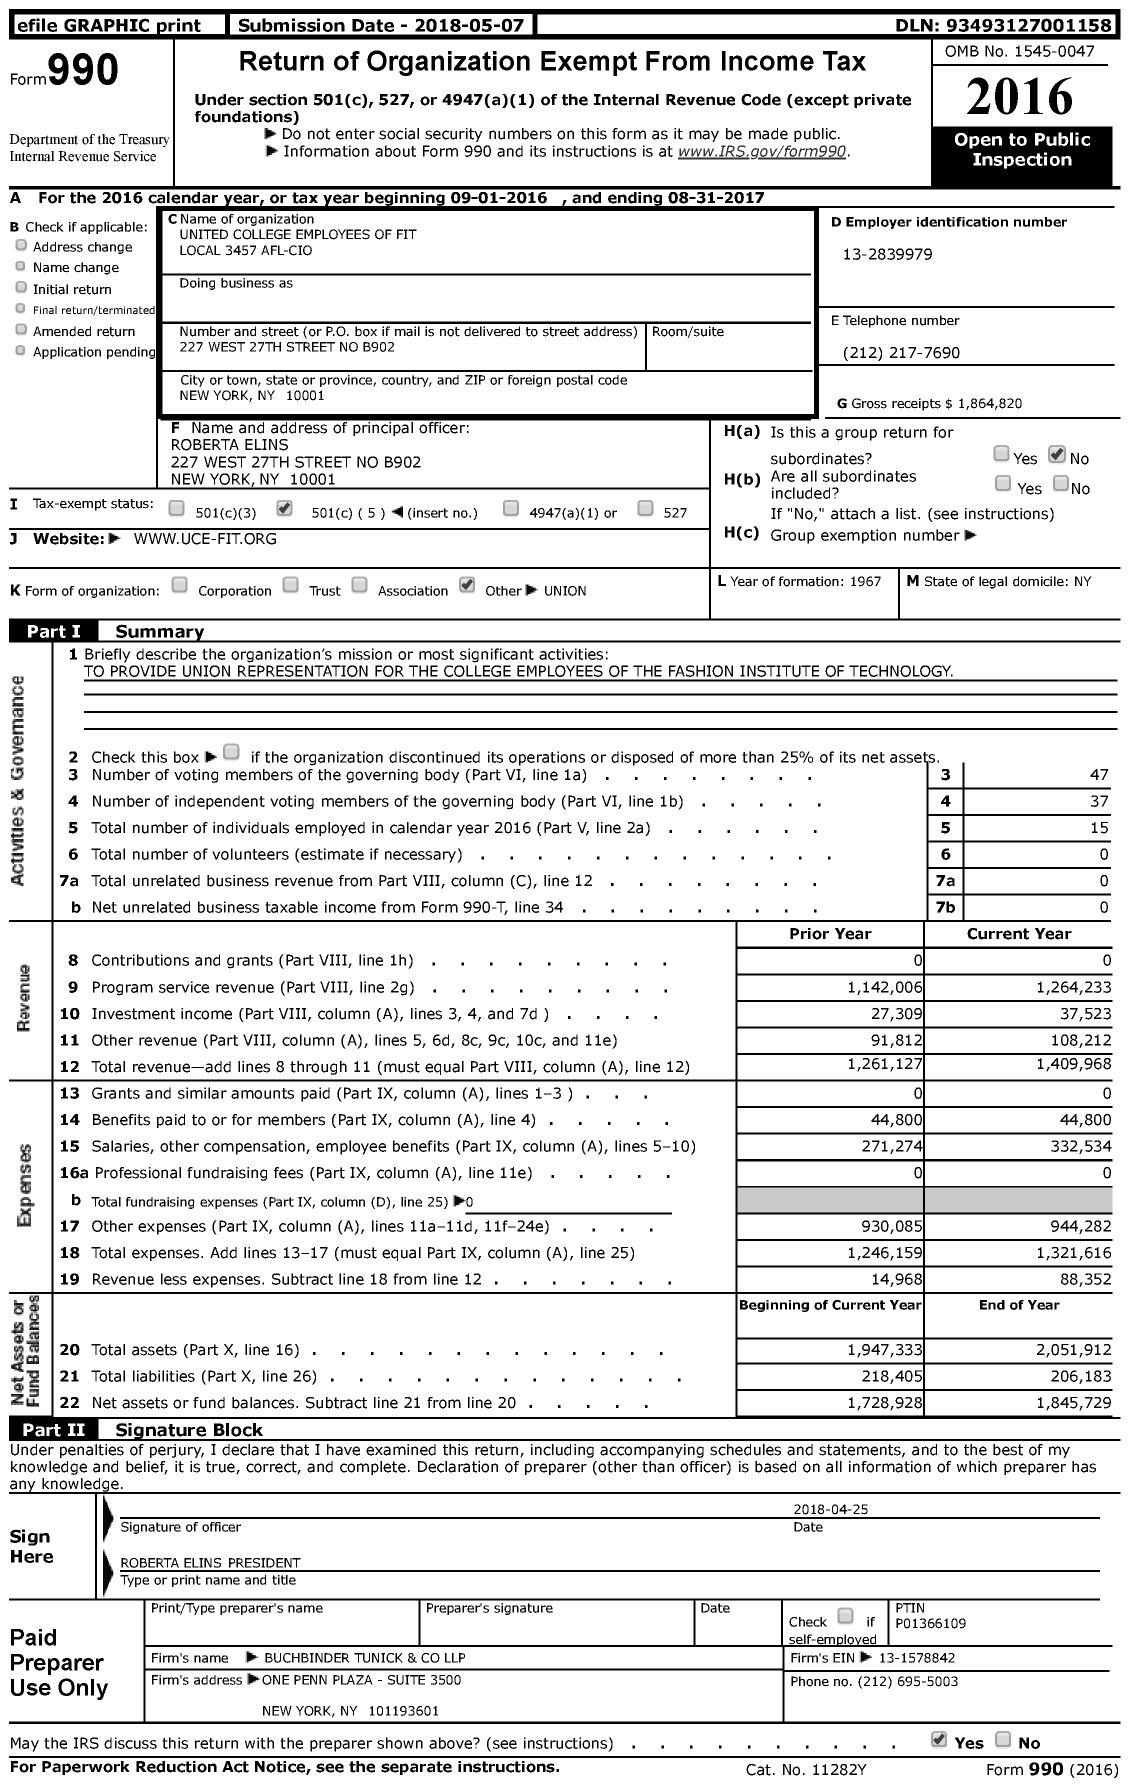 Image of first page of 2016 Form 990 for American Federation of Teachers - 3457 United College Employees of Fi